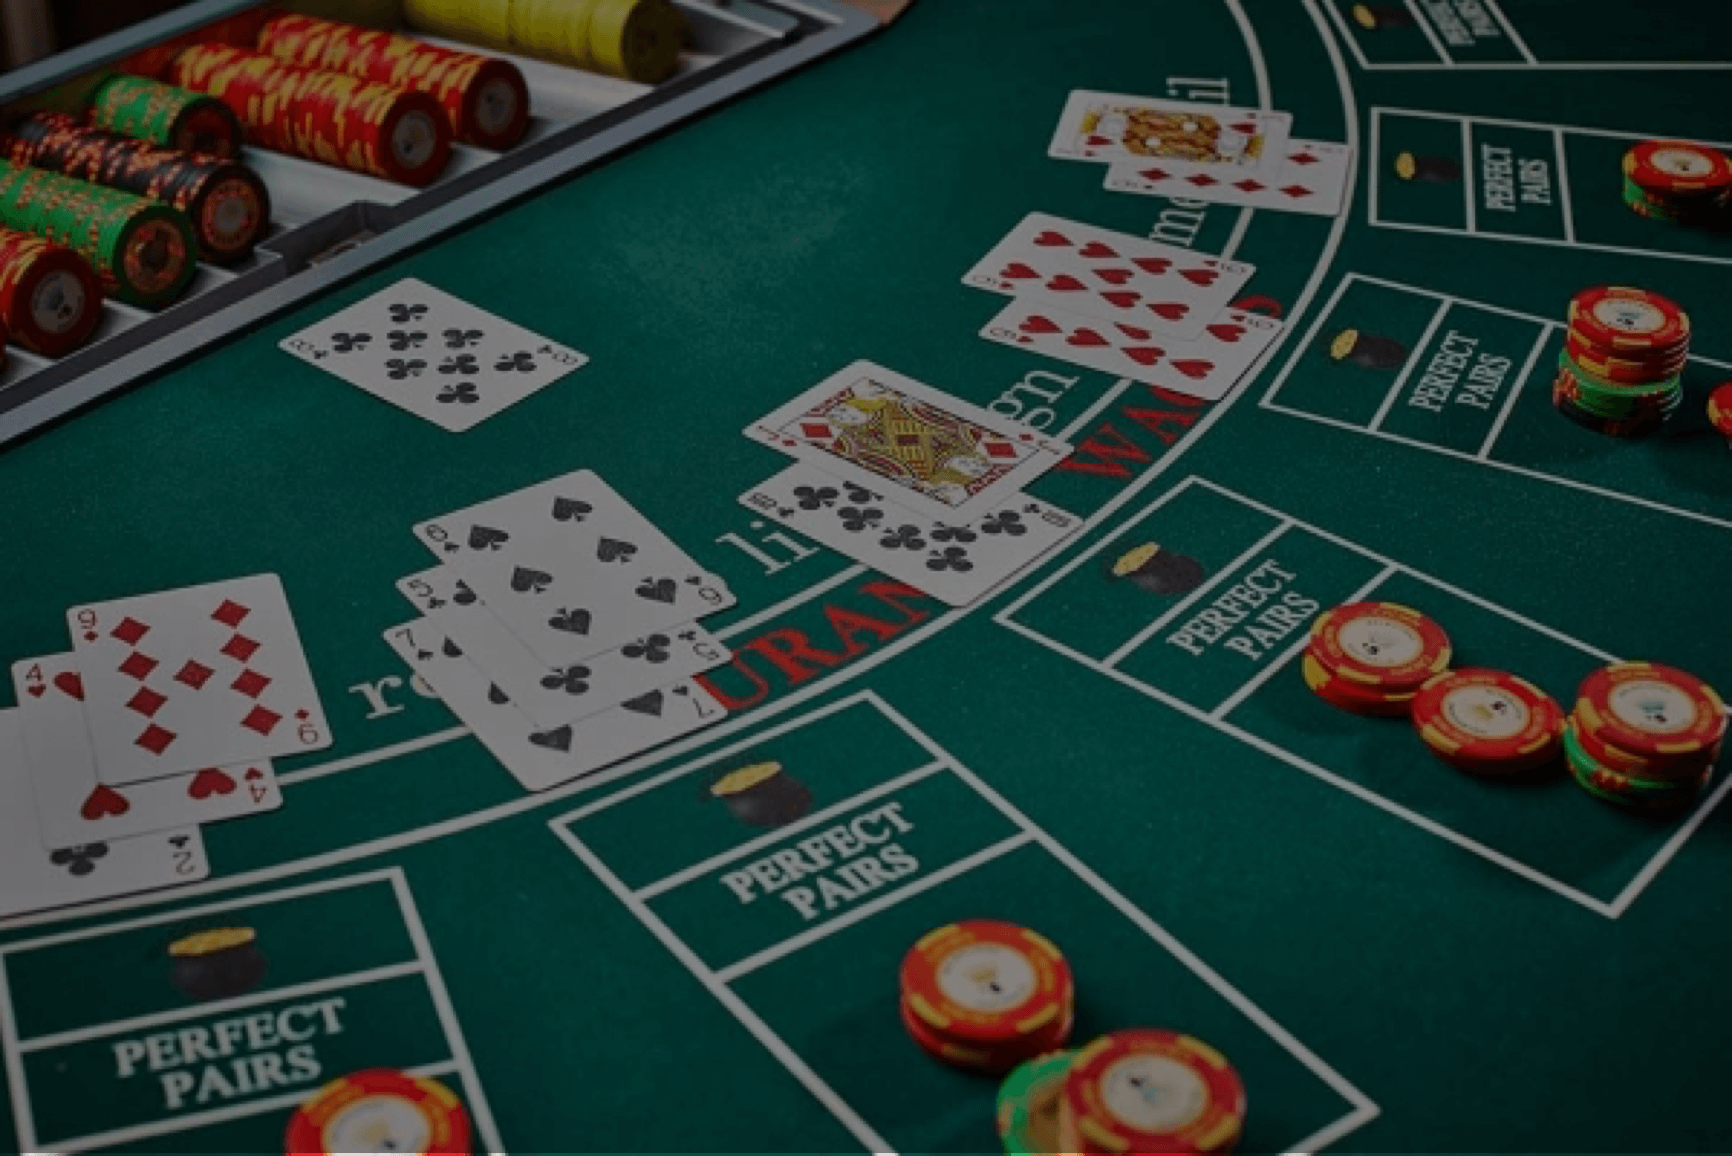 How to deal blackjack instructions